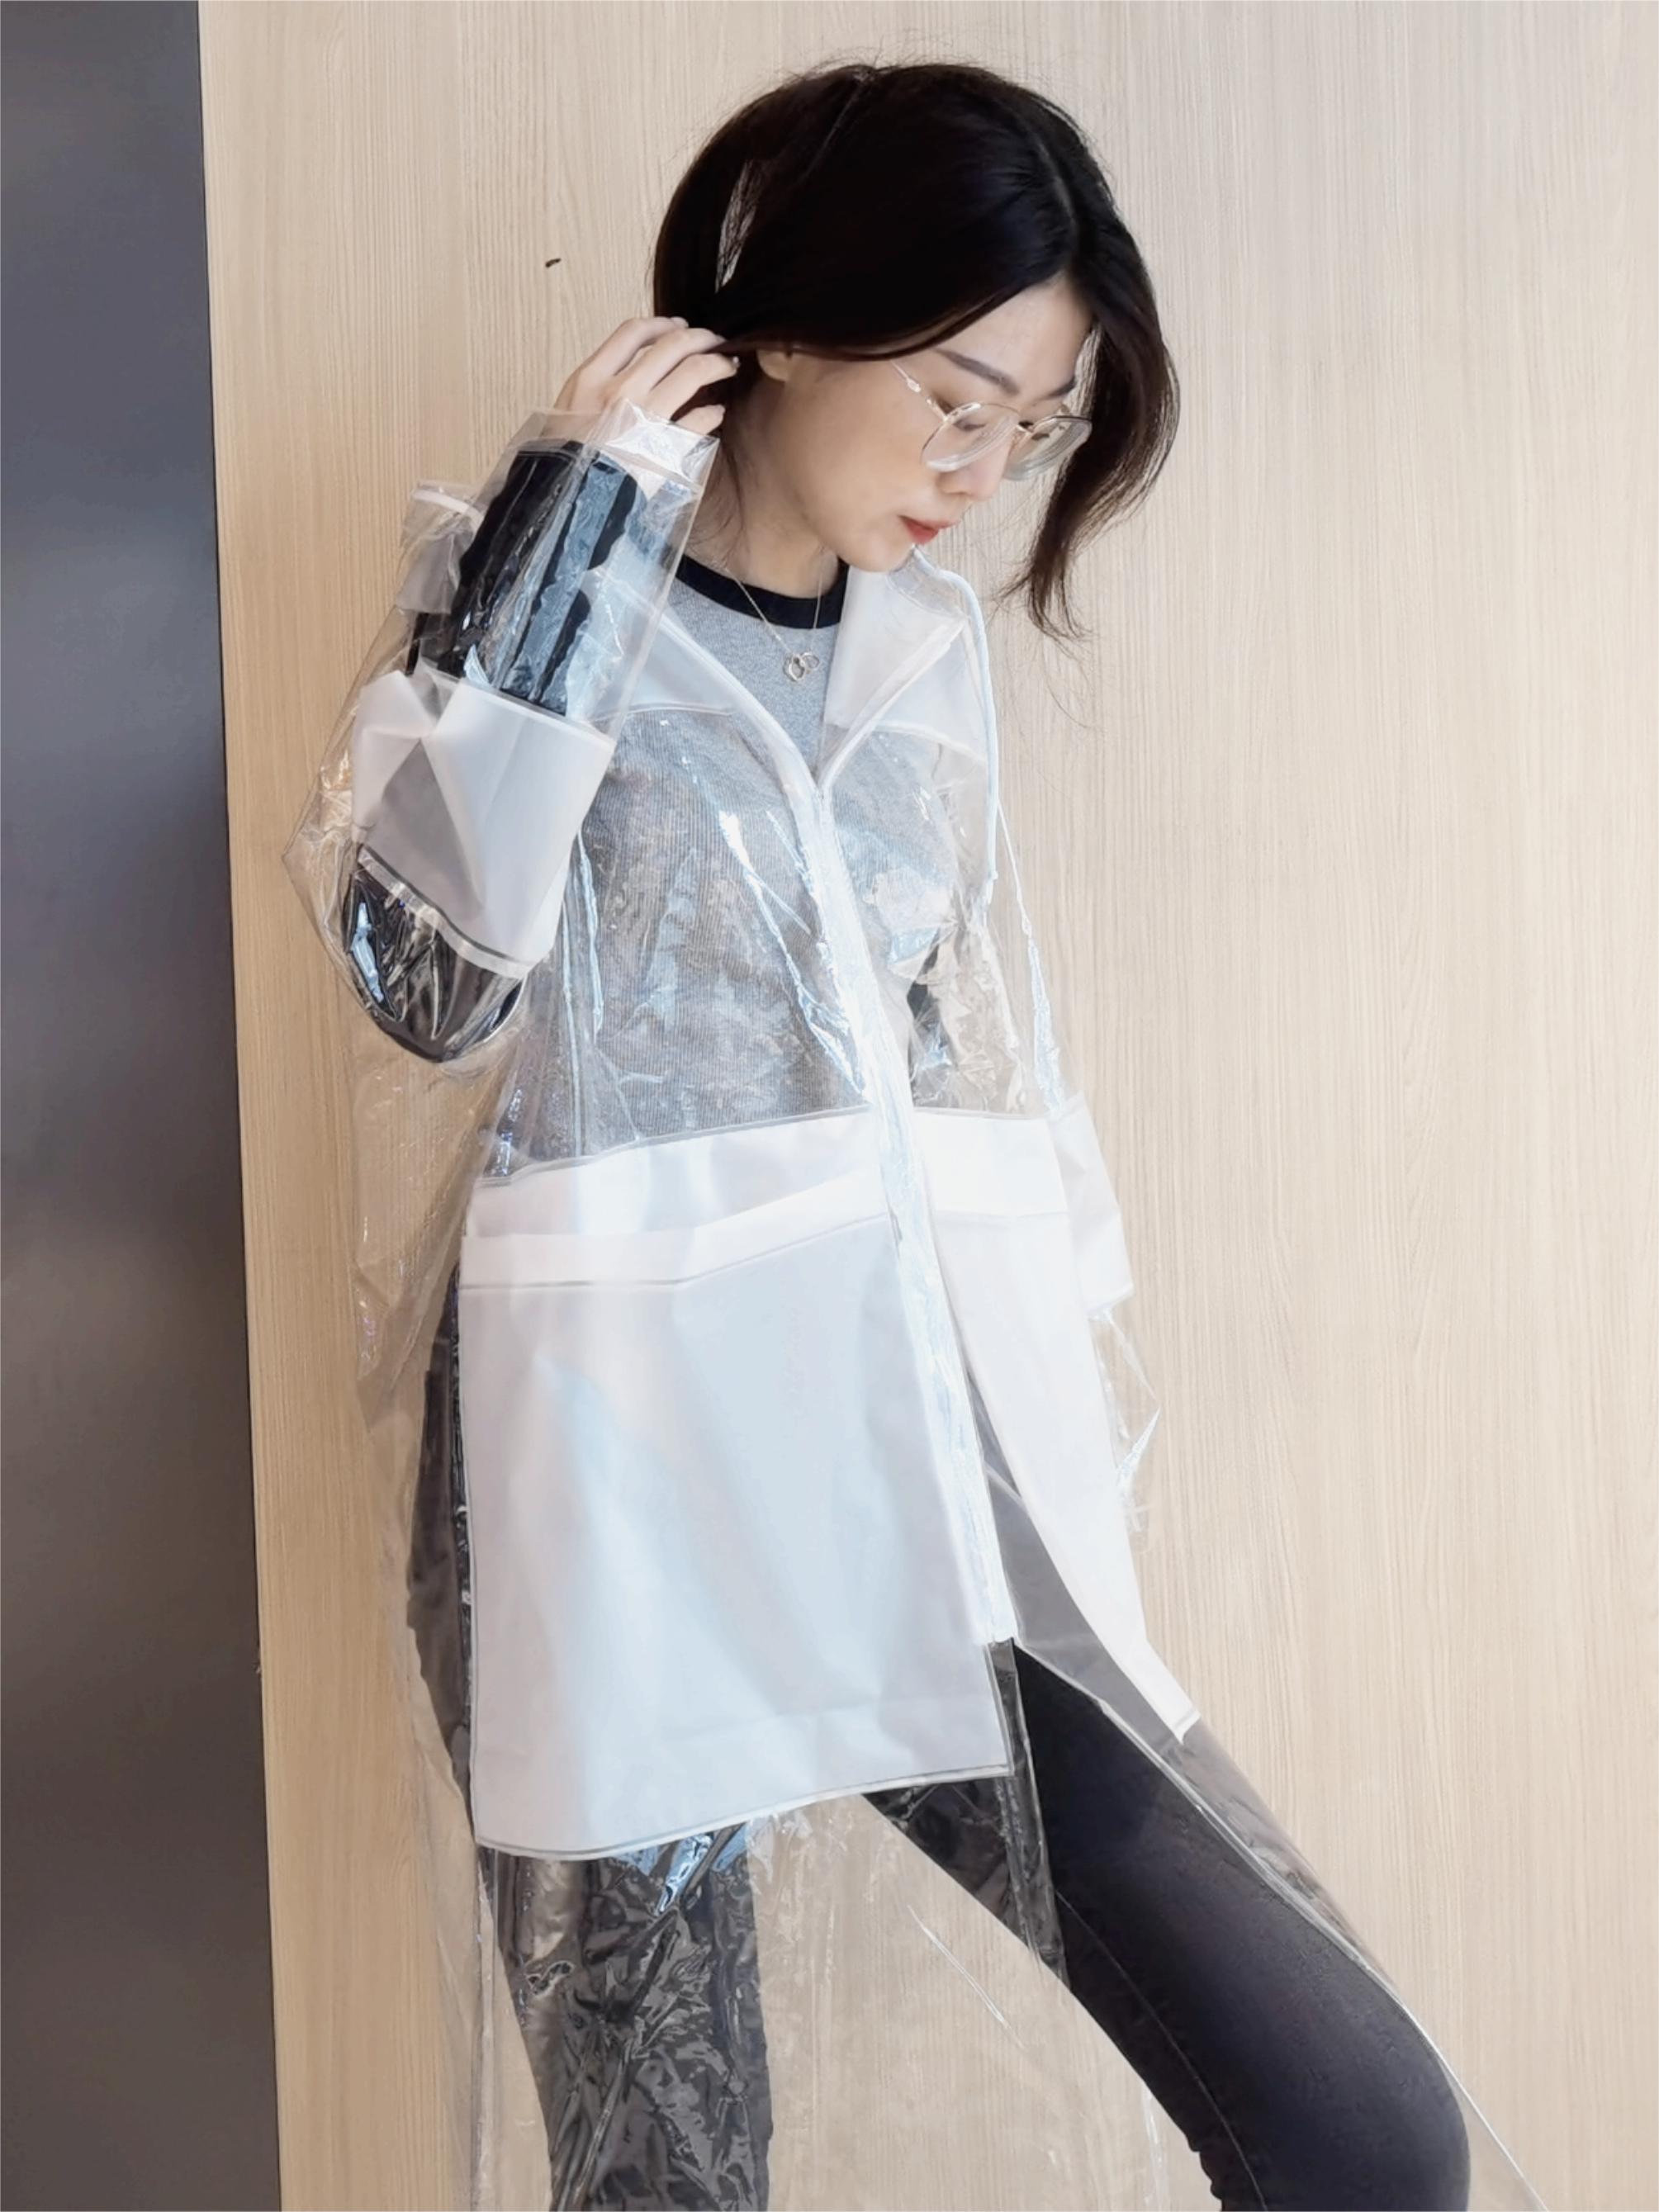 fashionable raincoat with transparent fabric long raincoat for women adult